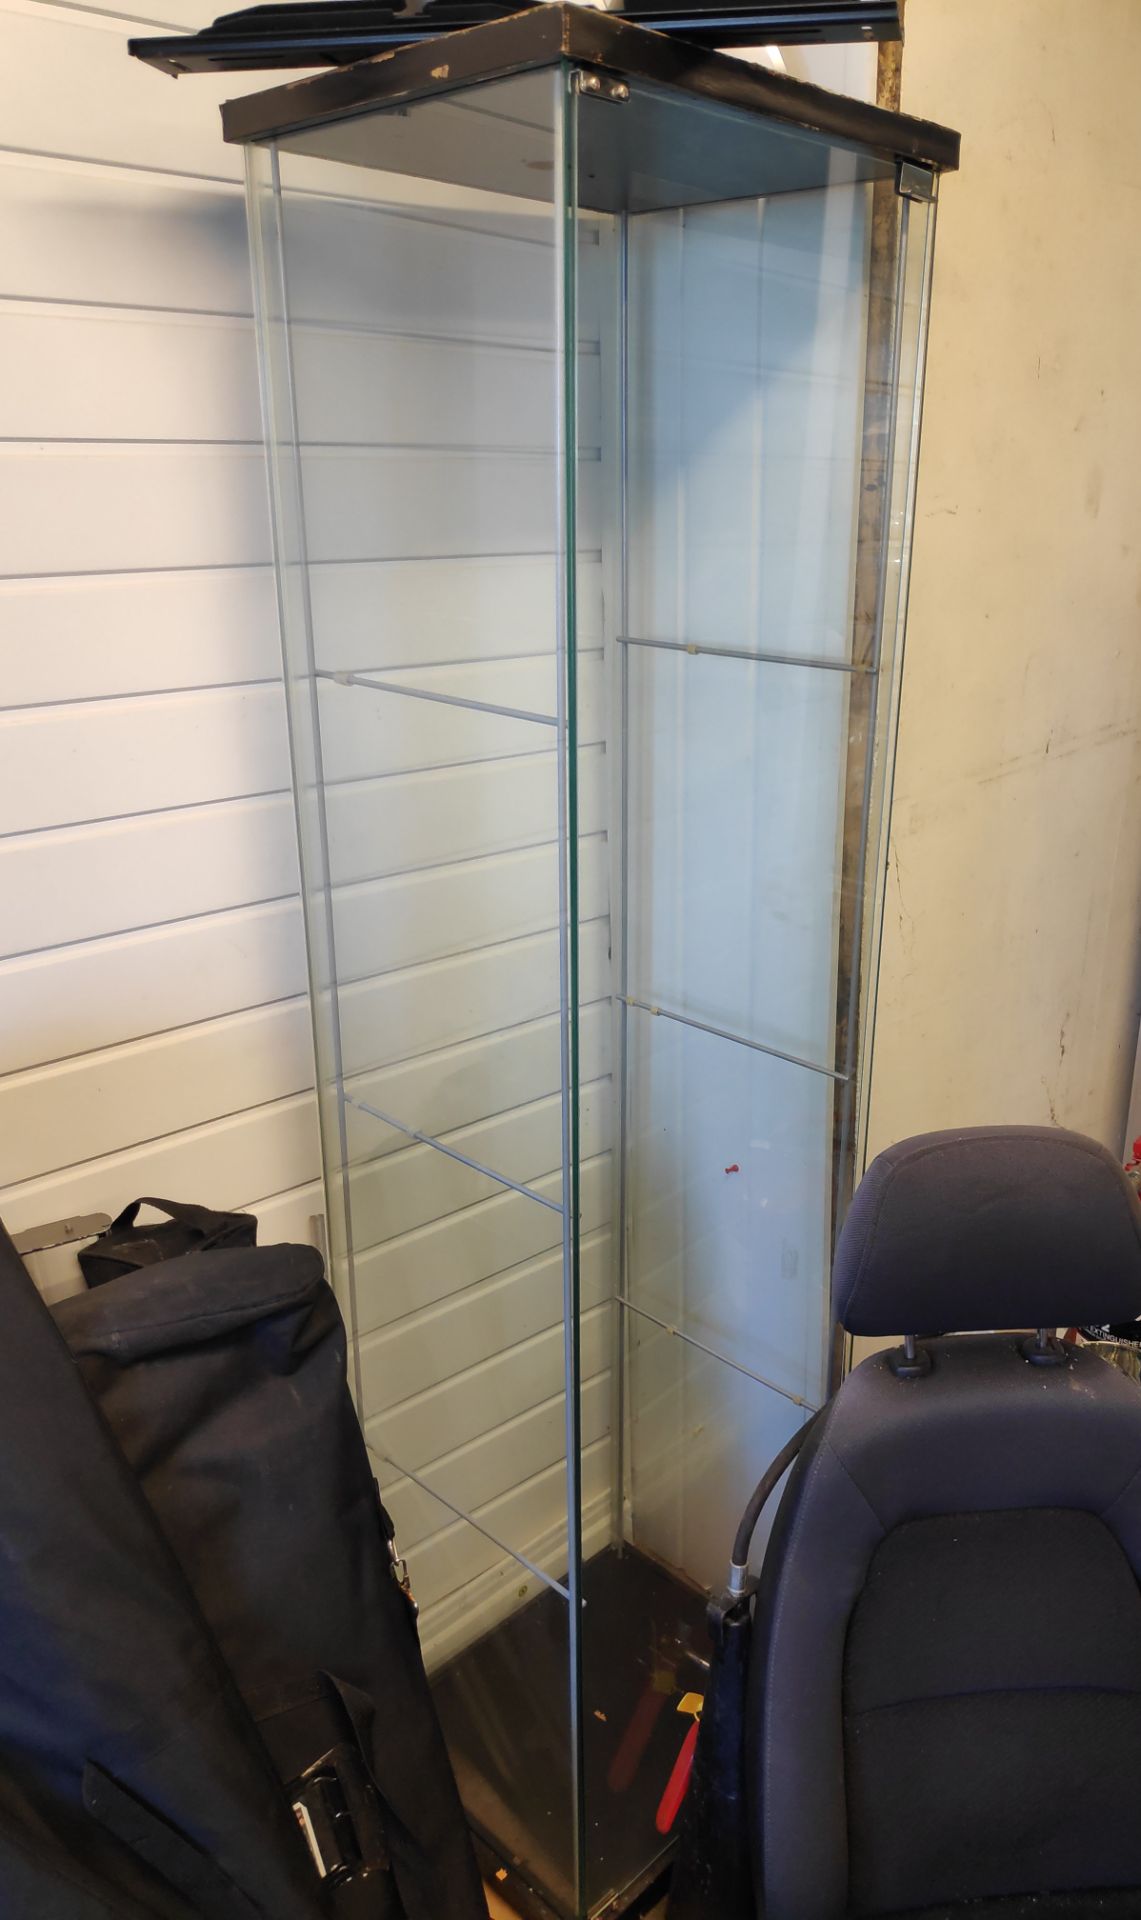 3 x Glass display Cabinets with shelves - CL682 - Location: Bedford NN29